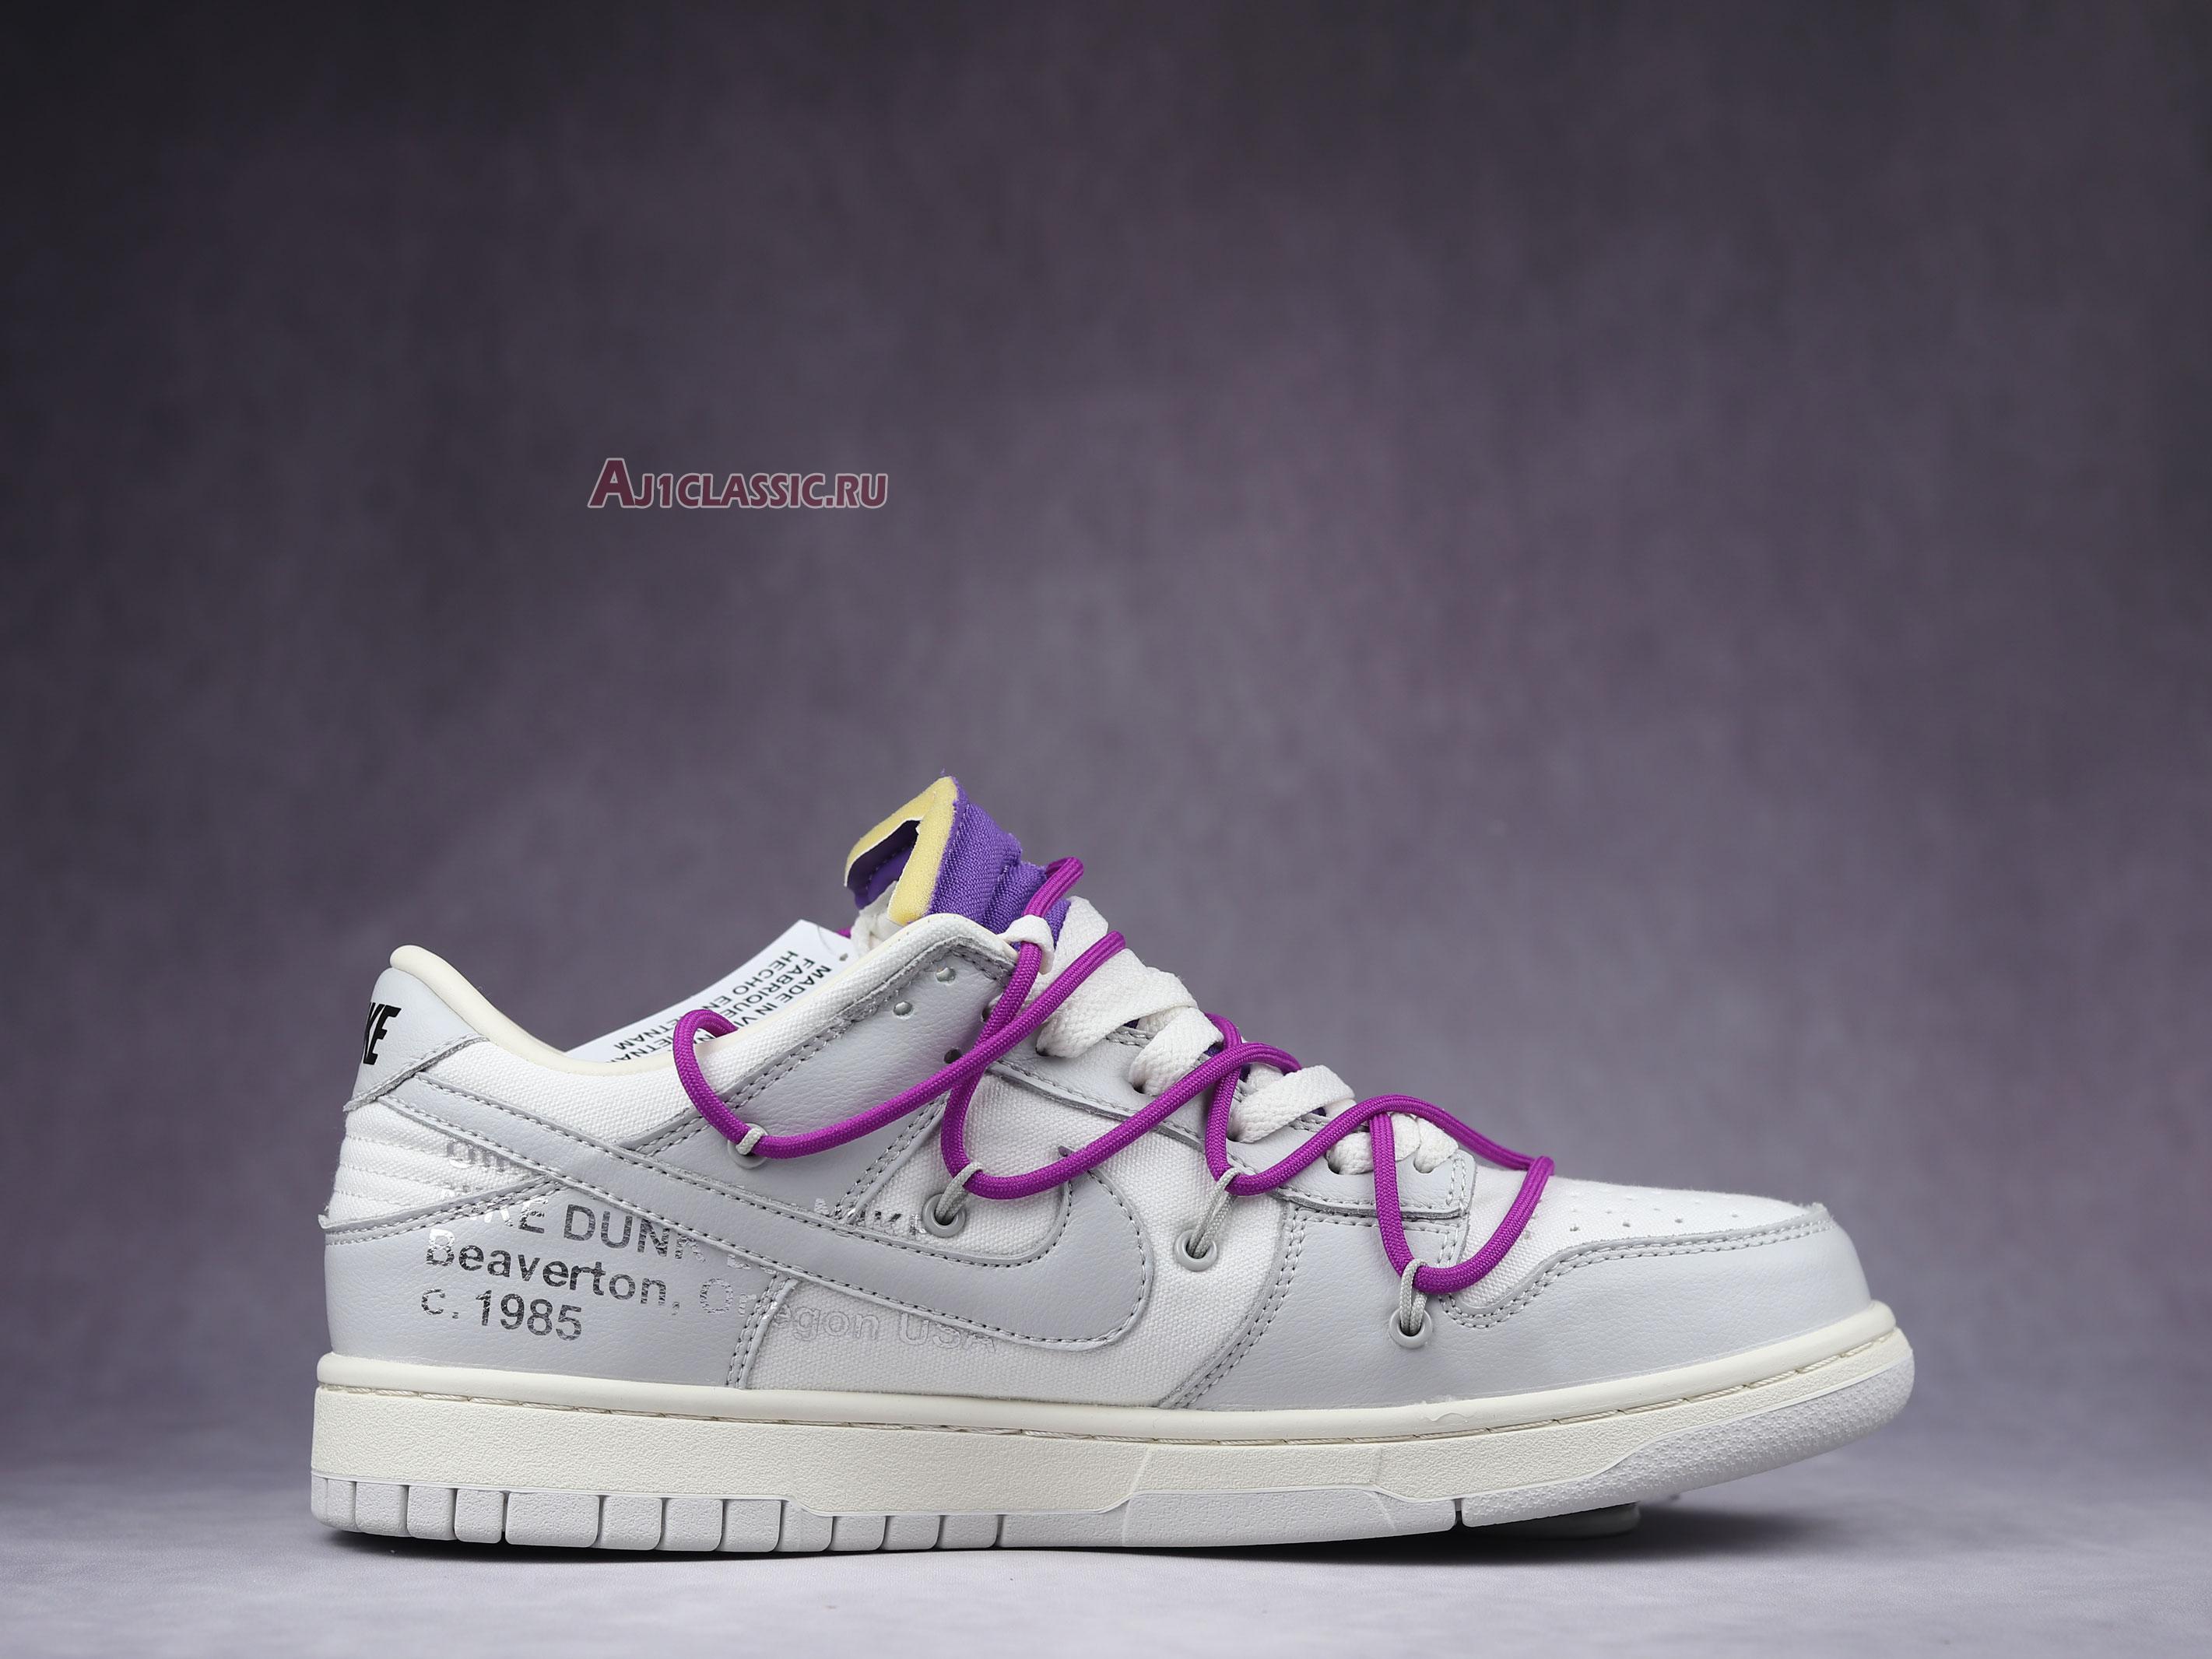 Off-White x Nike Dunk Low "Lot 28 of 50" DM1602-111